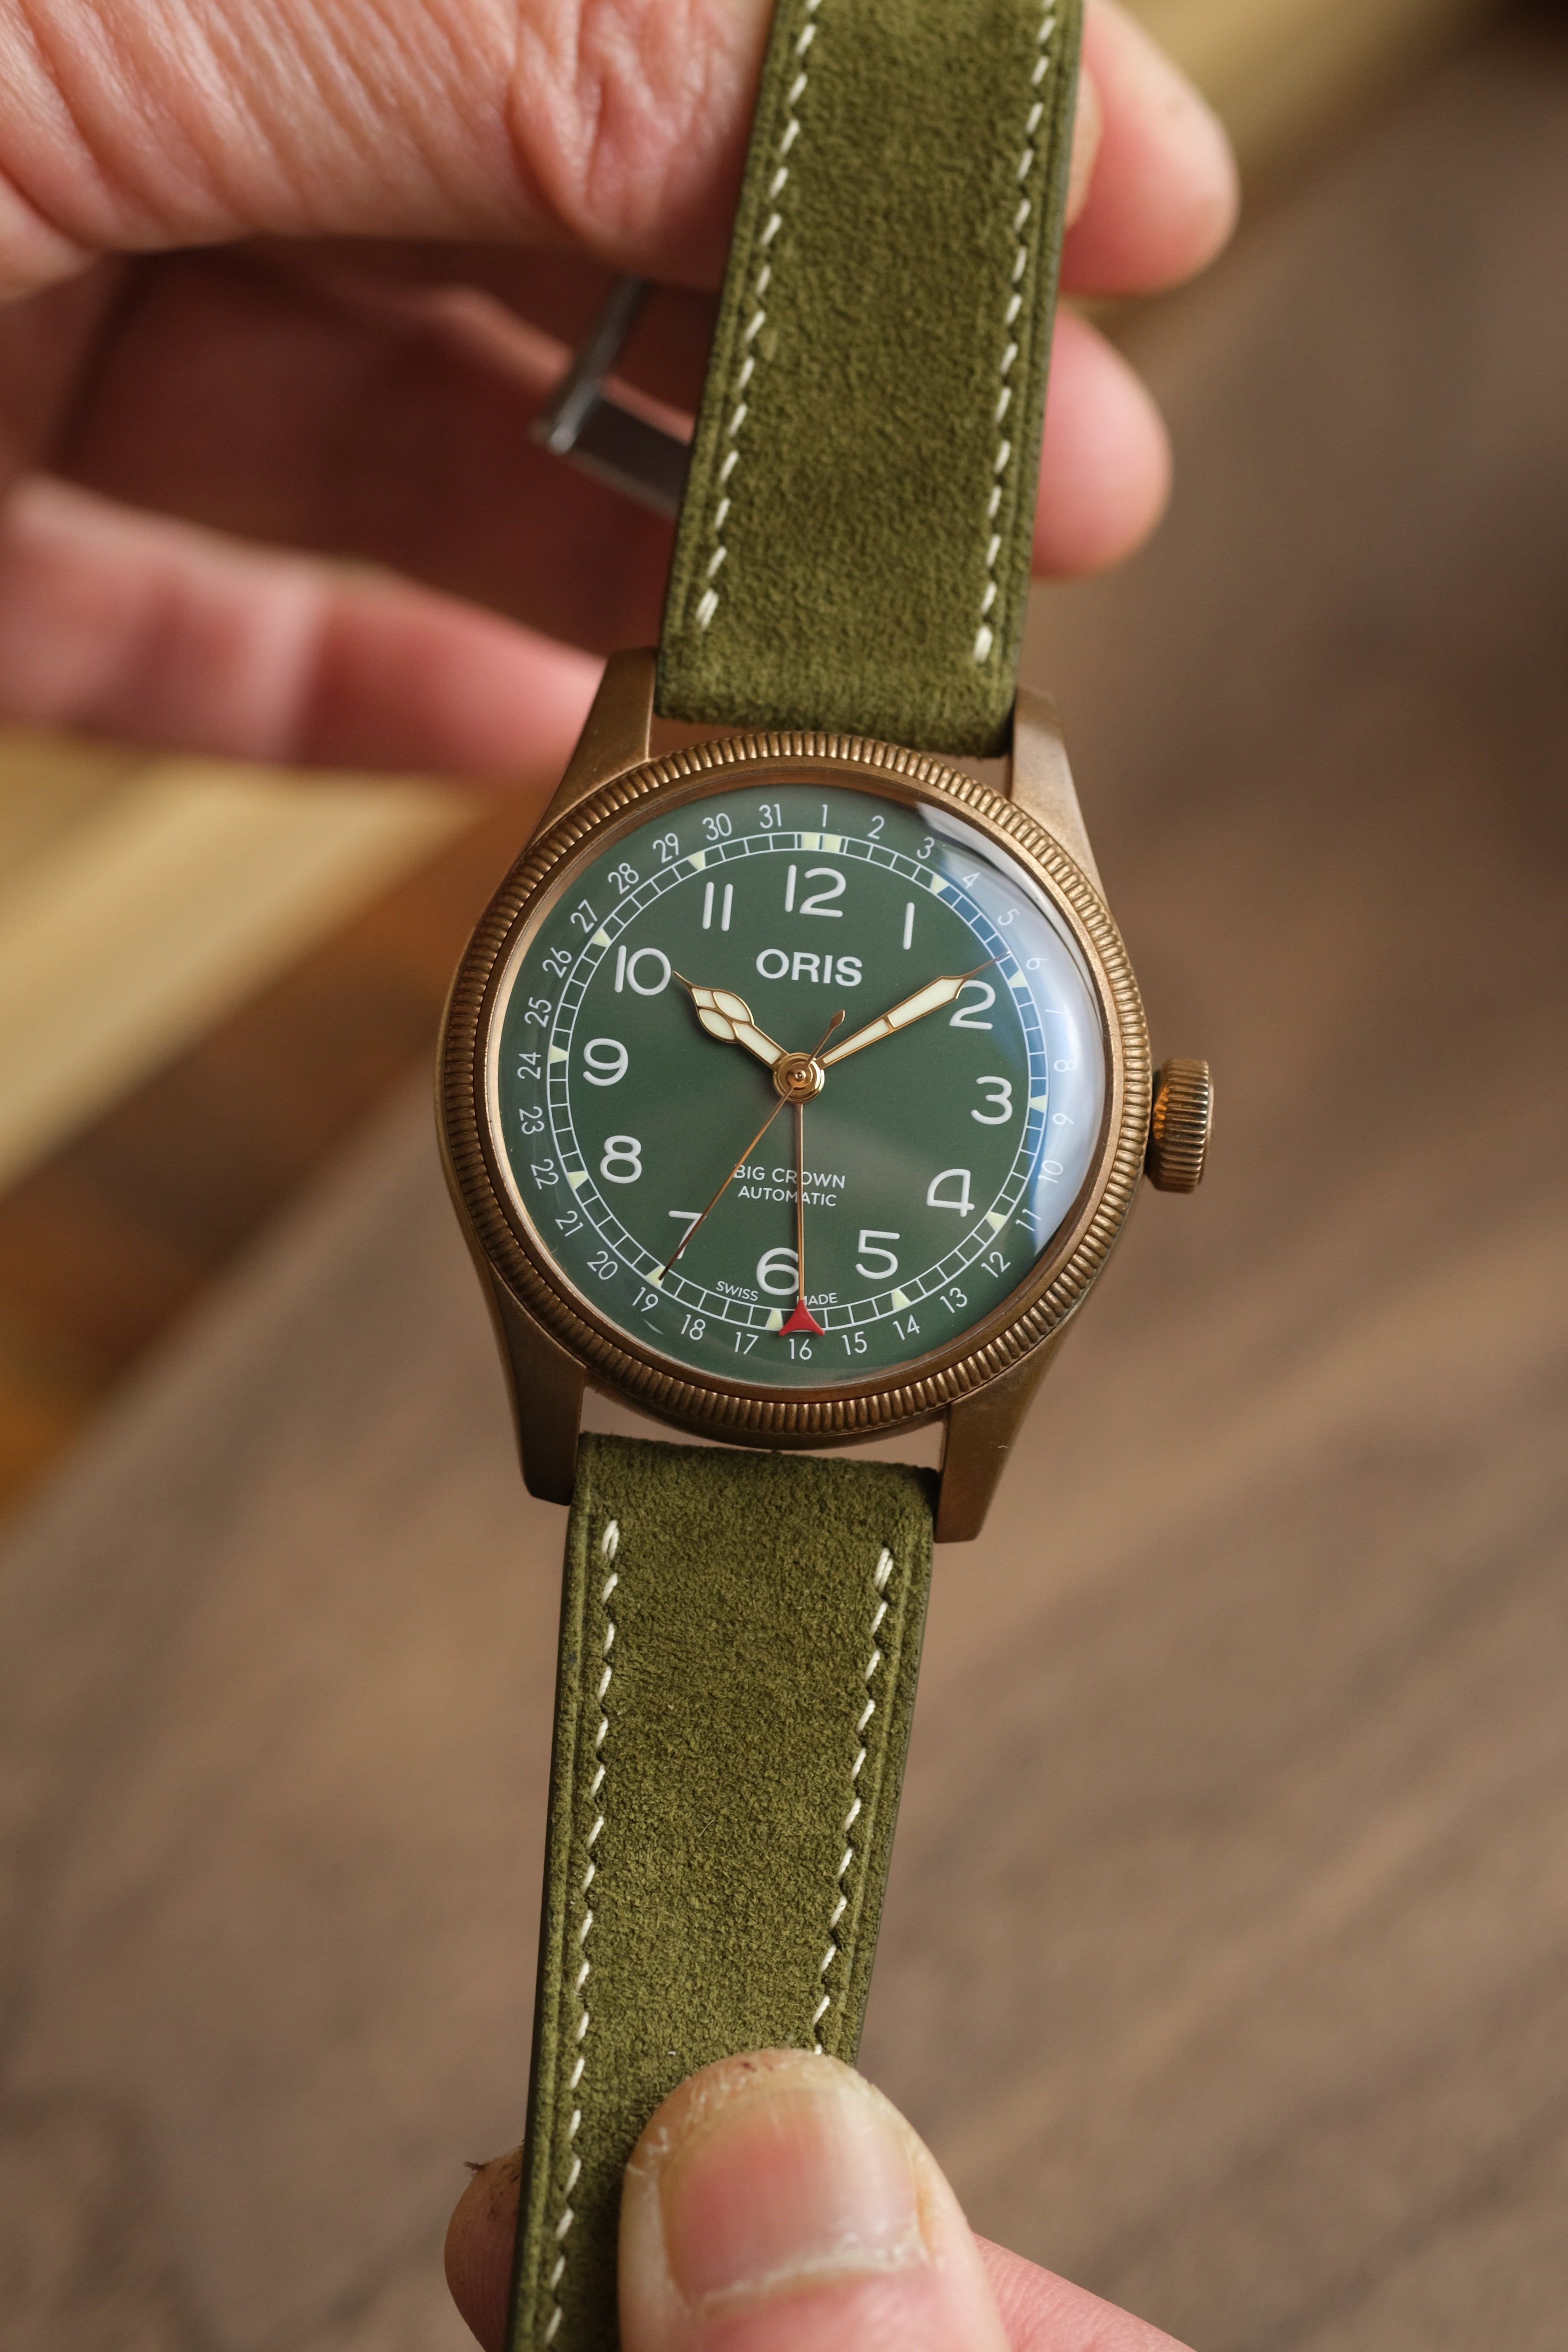 Moss Green Rugged Suede Leather Strap - Artisan Straps